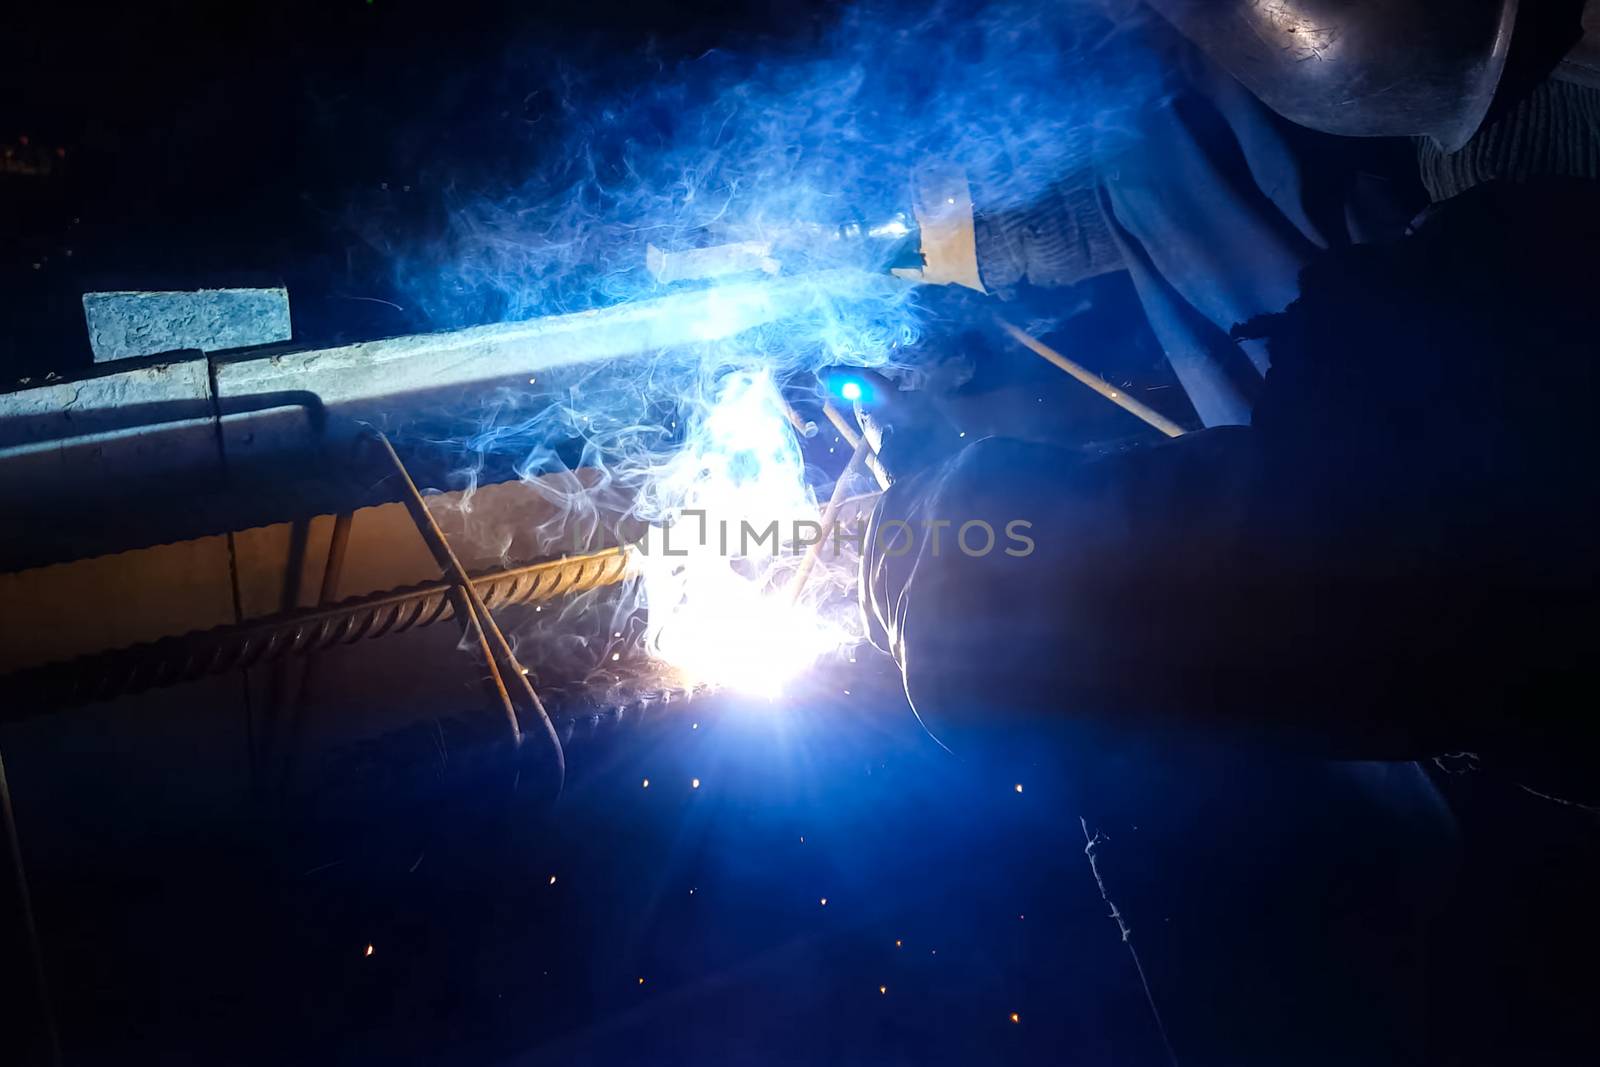 Welding of steel reinforcement. Sparks and light from welding. E by nyrok